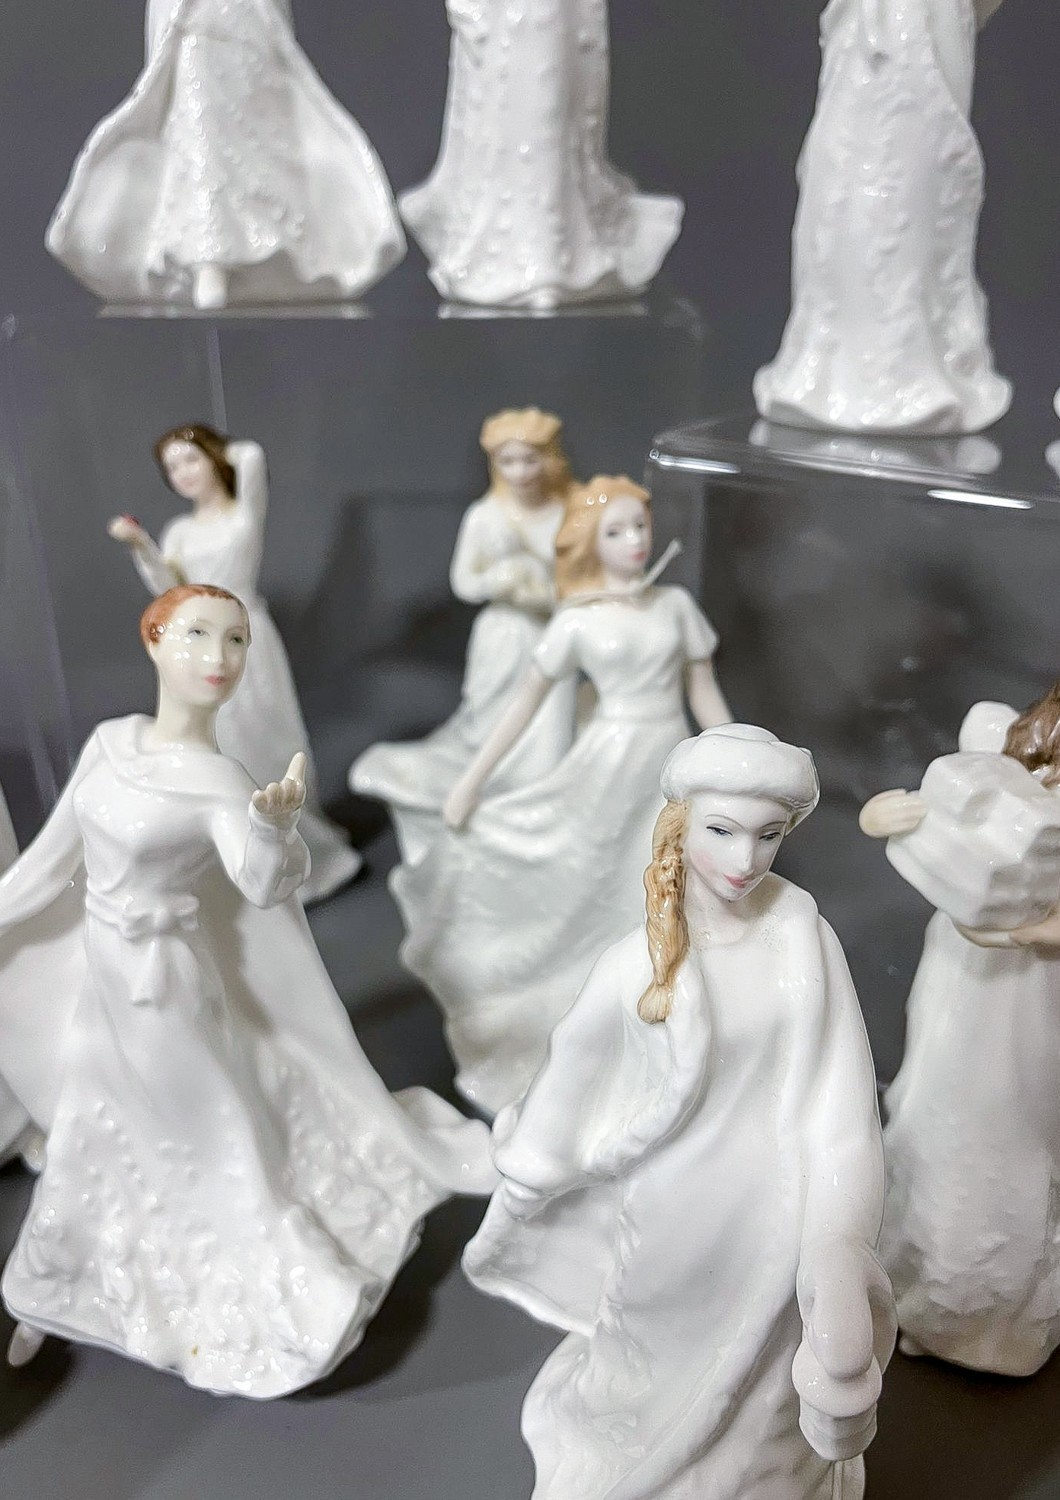 18 Royal Doulton figures from the Sentiments collection, each approx. 15 cm tall - Image 3 of 6